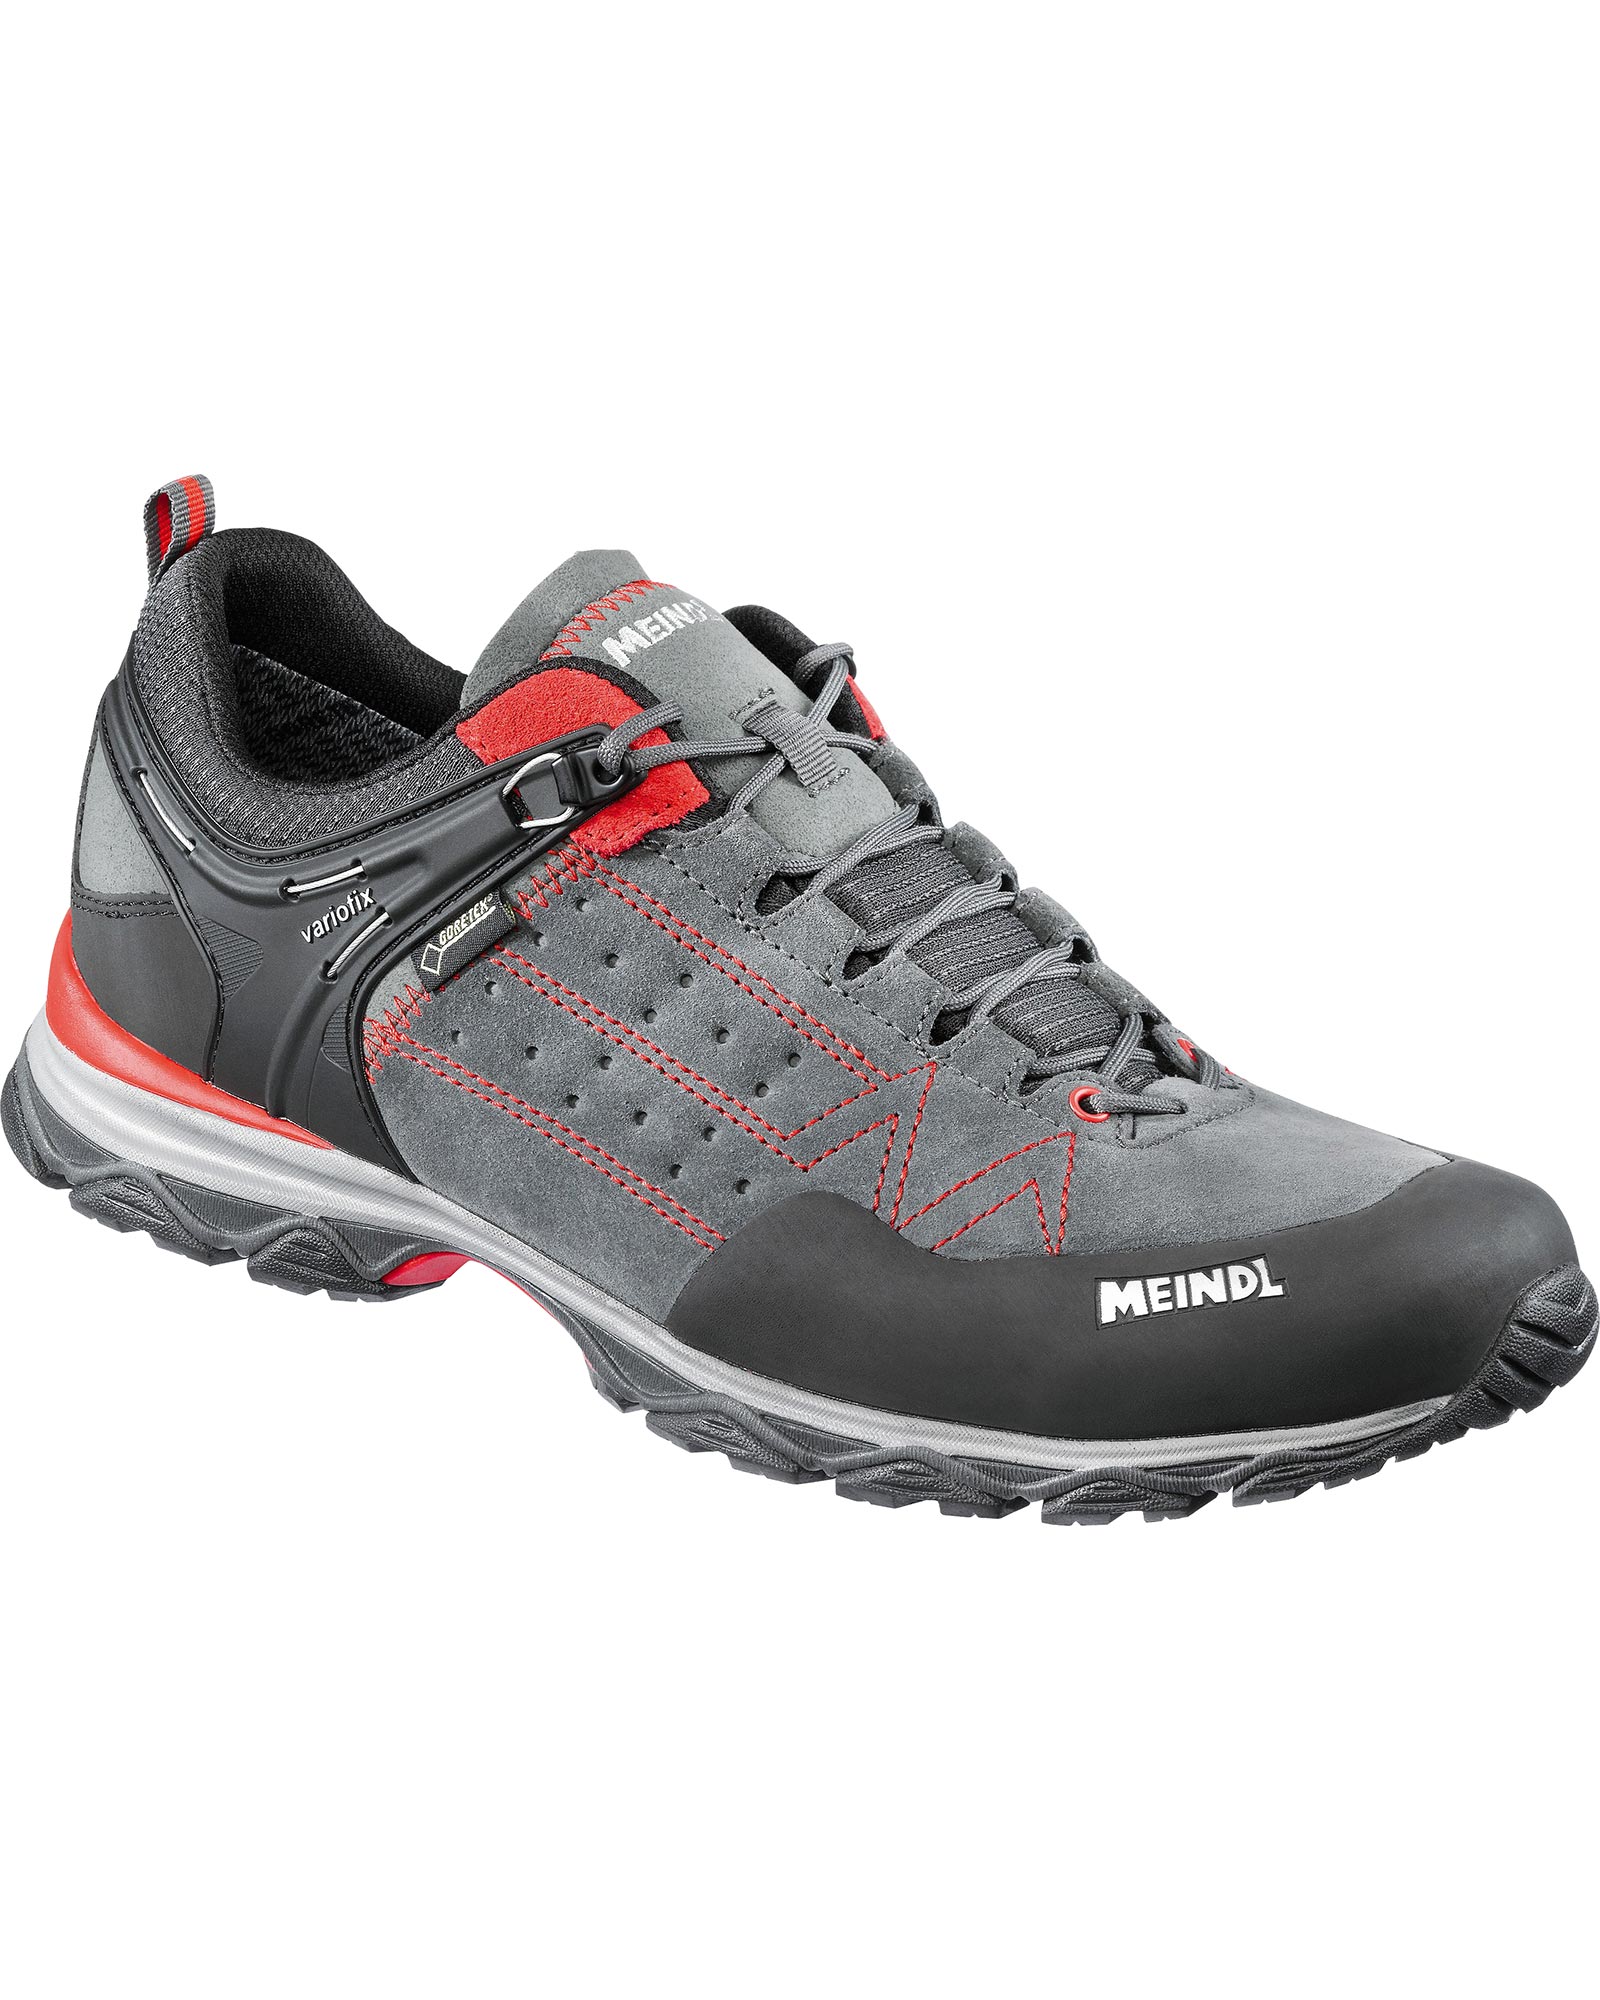 Meindl Ontario GORE TEX Men’s Shoes - Red/Anthracite UK 7